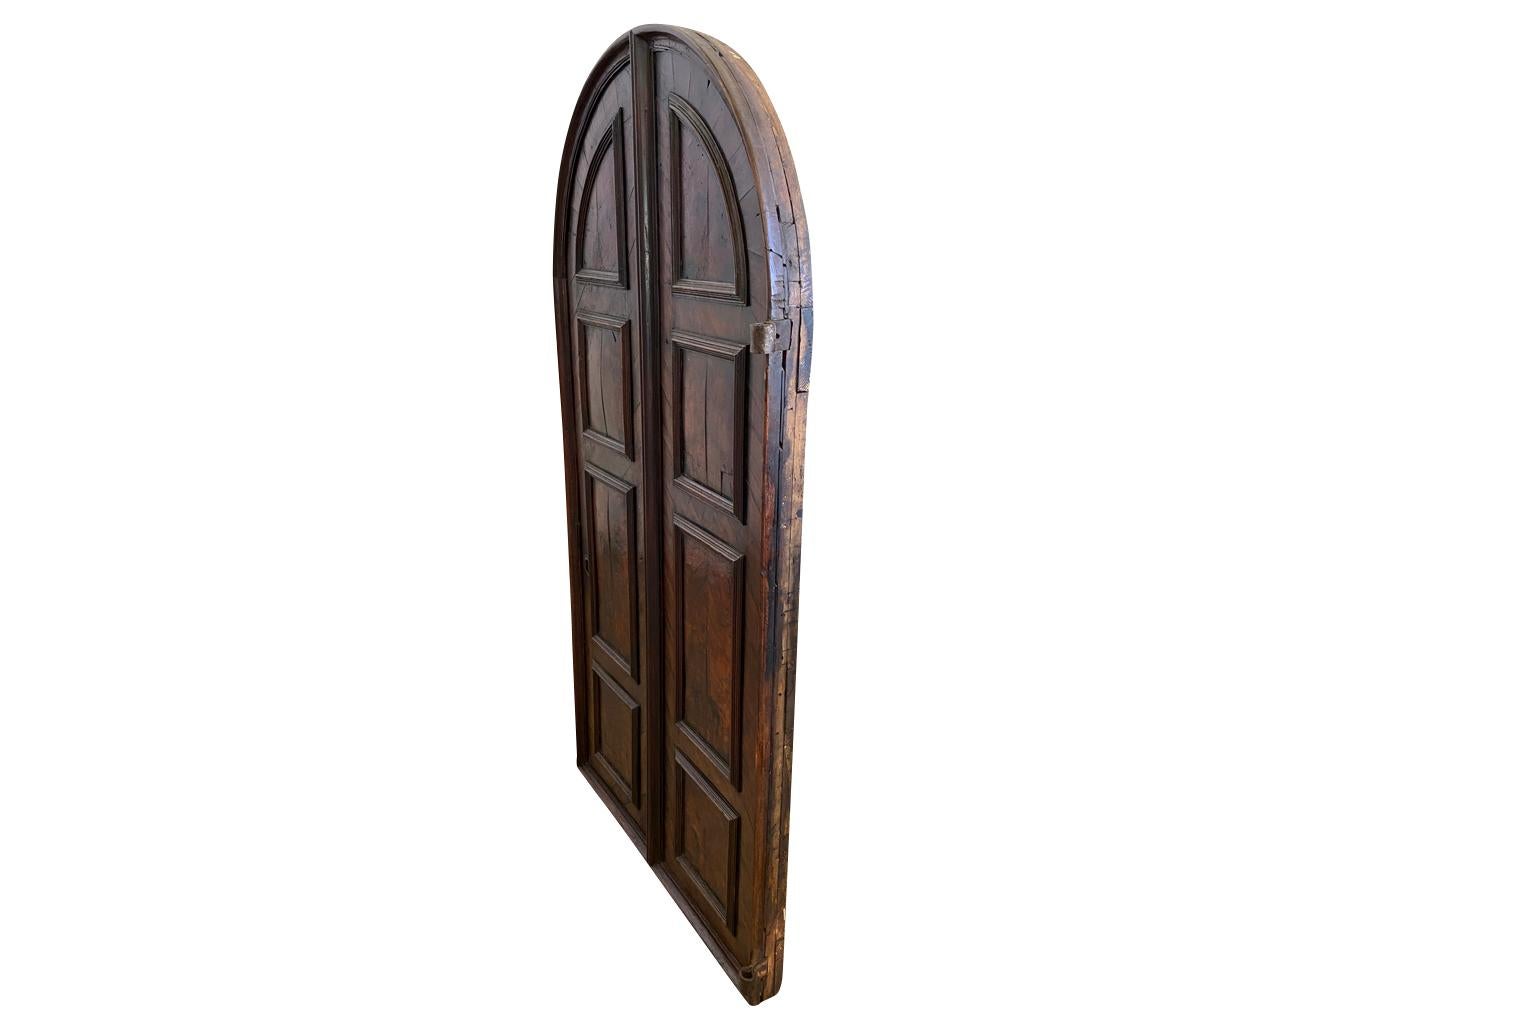 A very handsome early 17th century Door from Venice, Italy. Doors such as this were used to cover cupboards that were recessed into the wall. Beautifully constructed from walnut. Fabulous patina - warm and luminous.